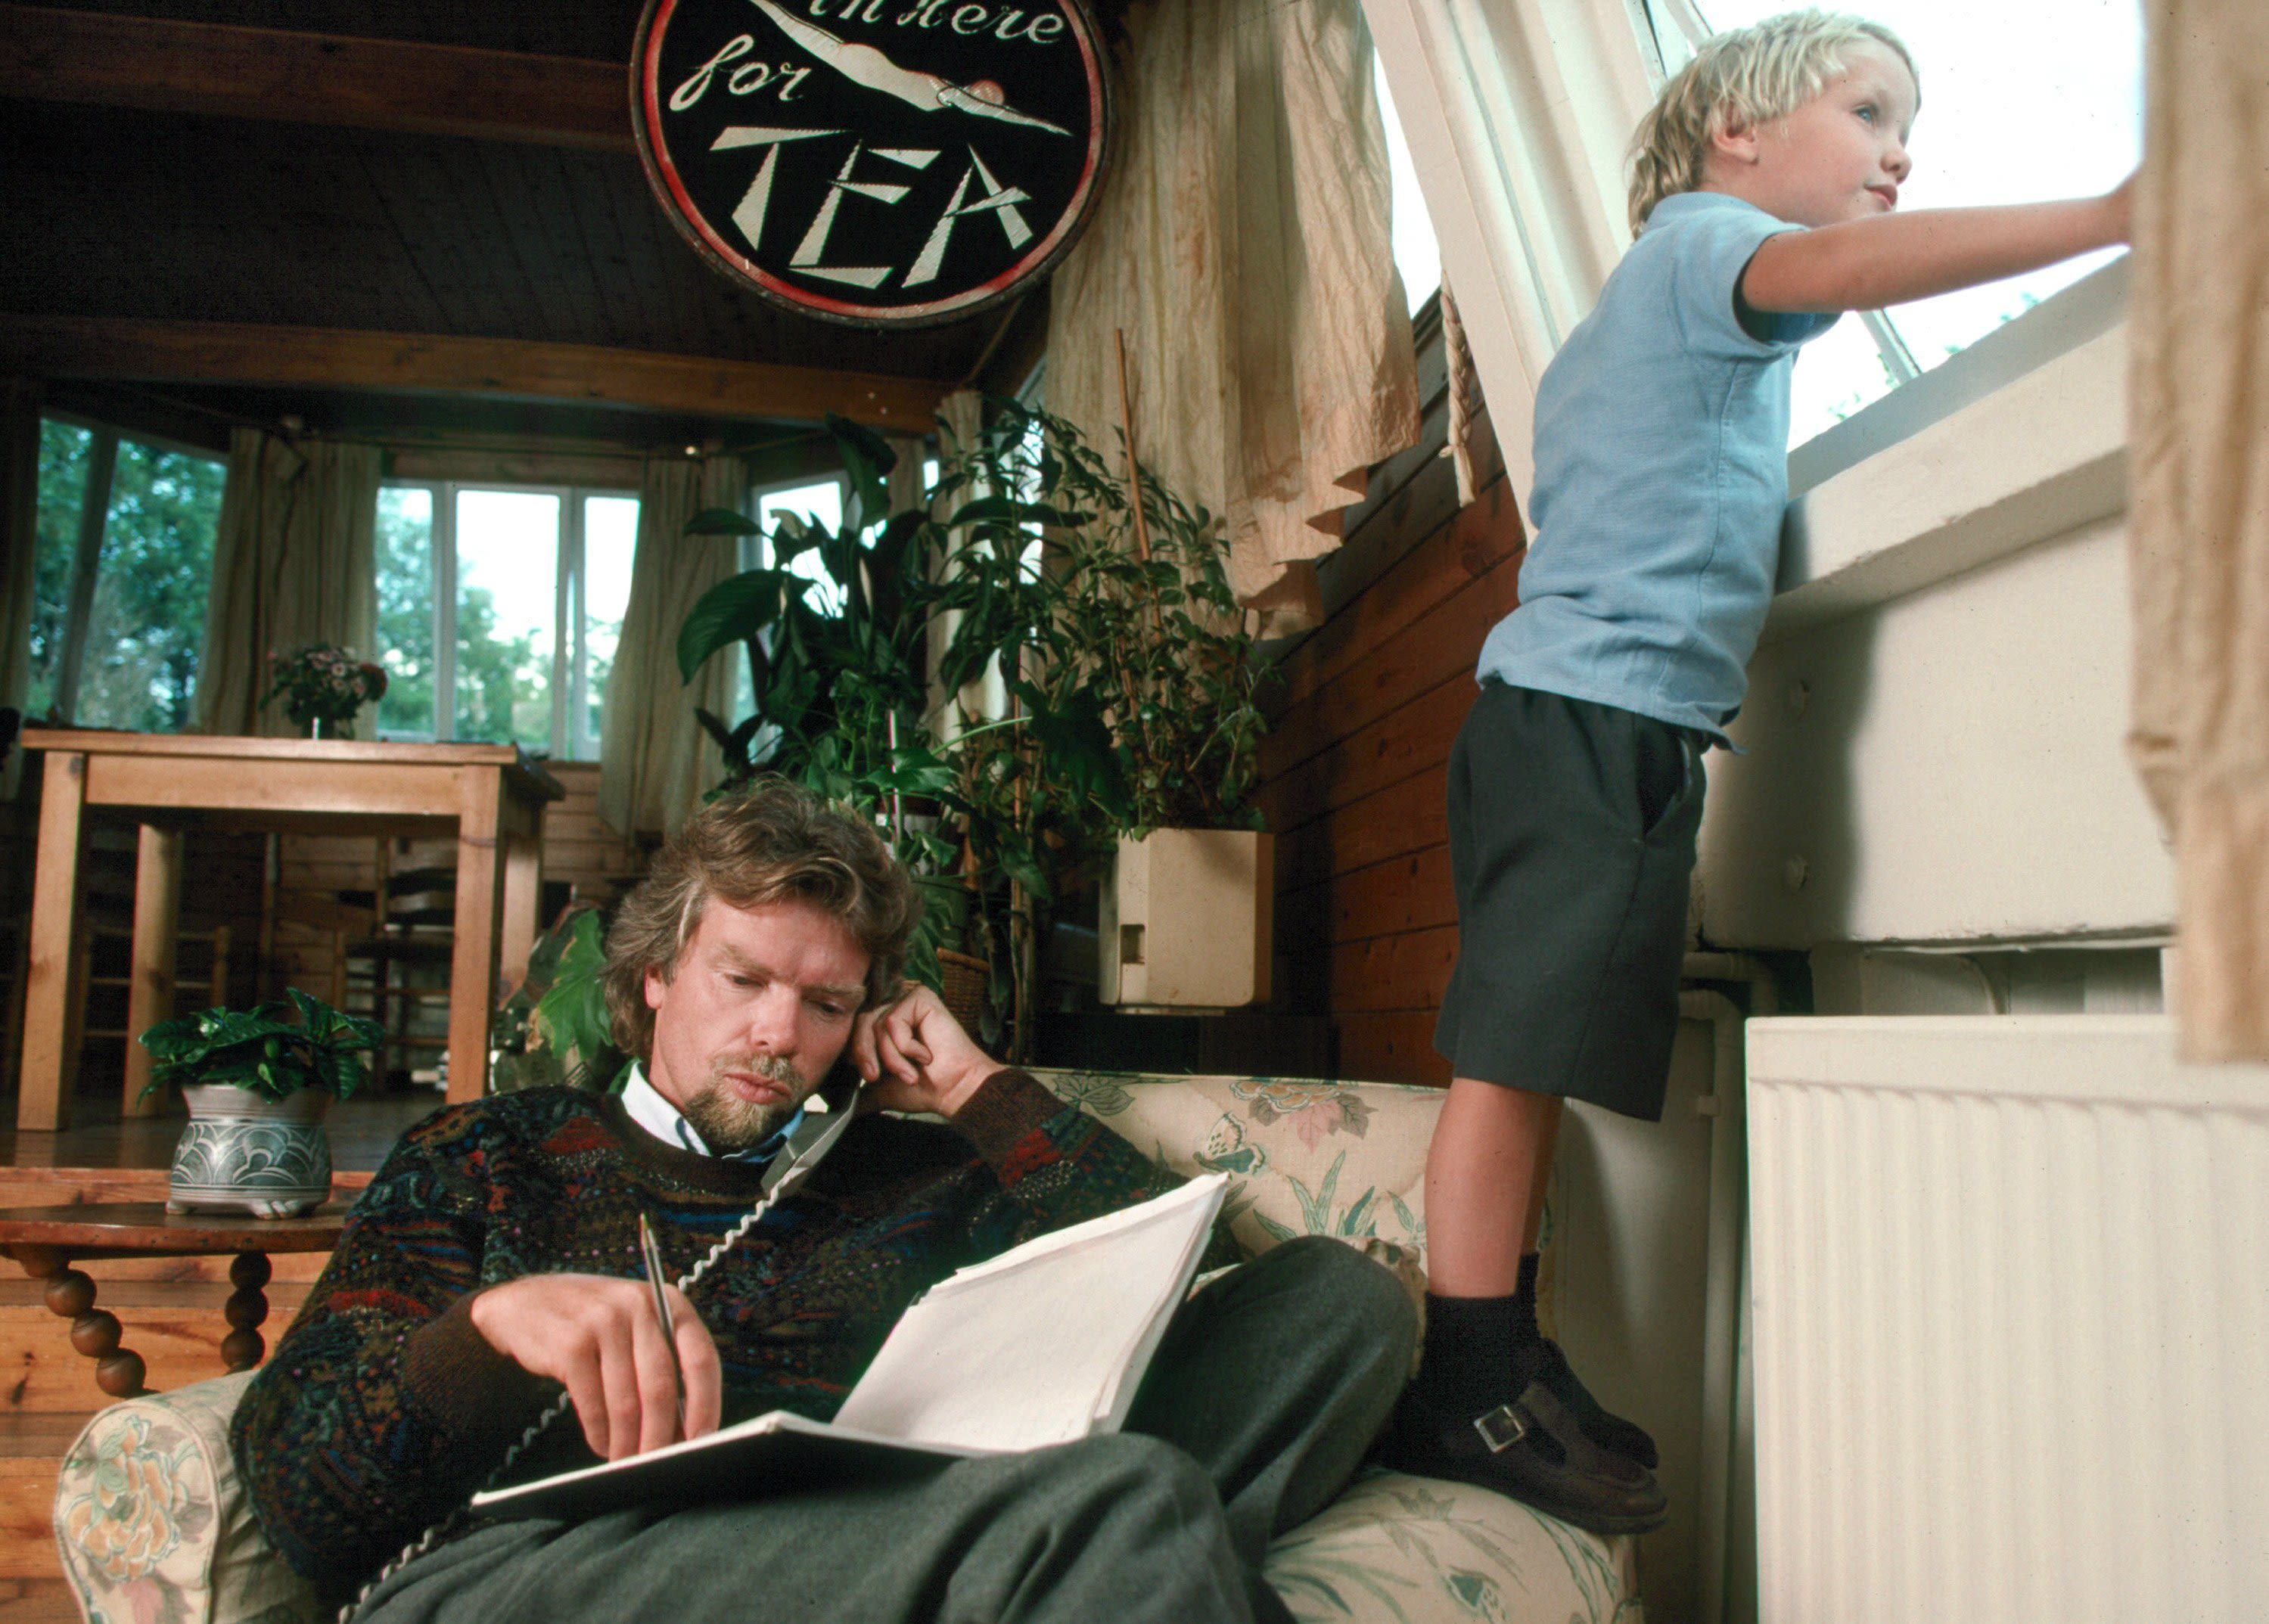 Richard Branson sitting in a chair on the phone in his houseboat. Sam Branson as a boy, is standing on the arm of the chair looking out of the window